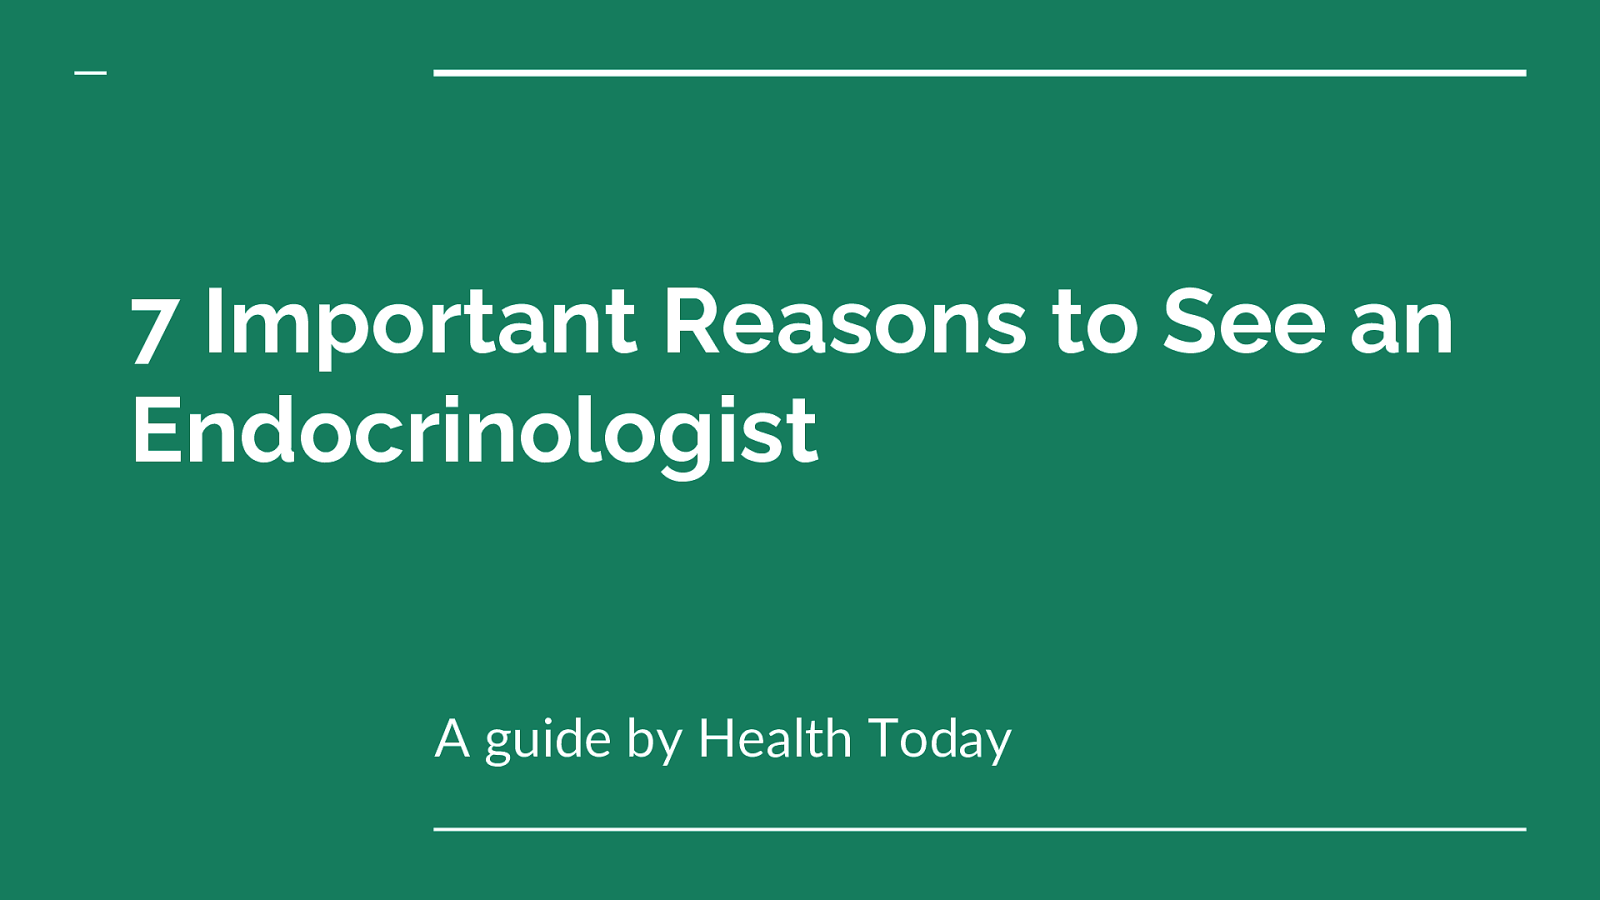 7 Important Reasons to See an Endocrinologist